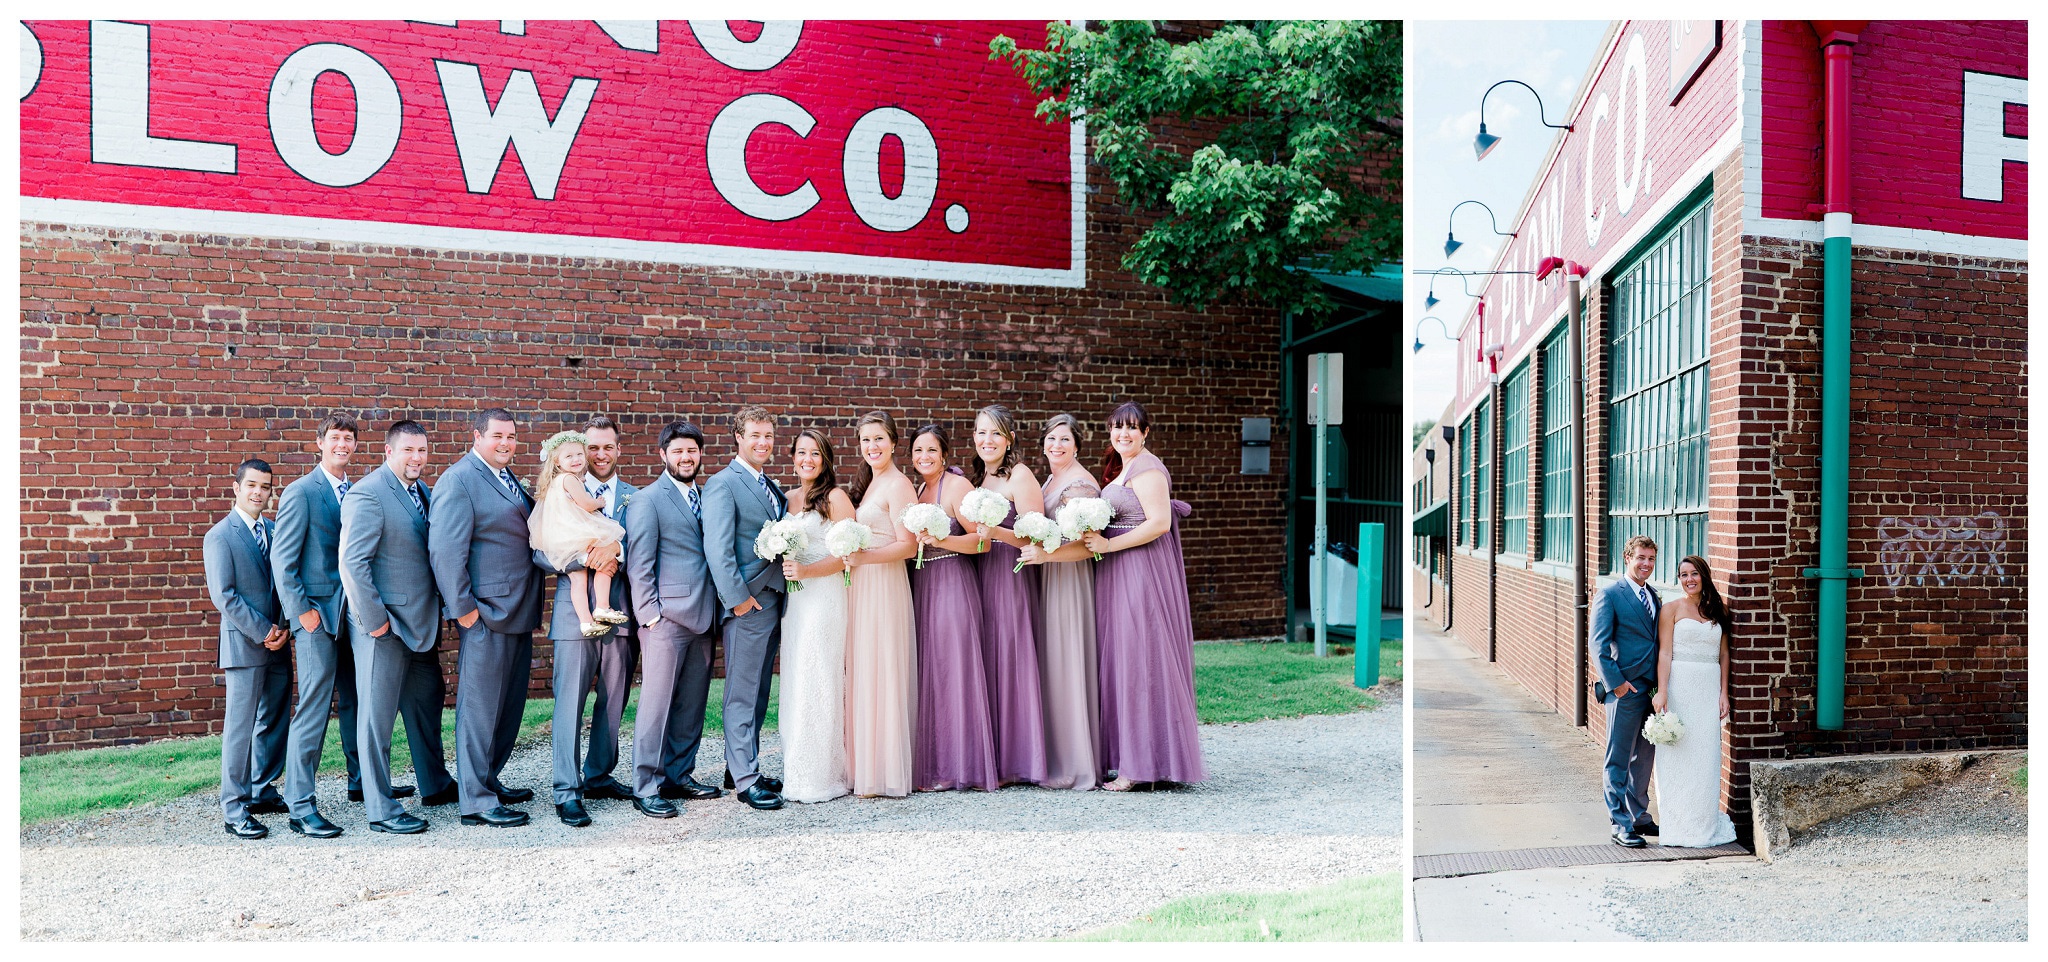 The full wedding party posd in front of the venue- Venue and Catering – King plow Event Gallery and Bold American Events Decor and flowers – Stylish Stems Music and Band – Seven Sharp Nine Transportation – Georgia Trolley Photographer One Life Photography